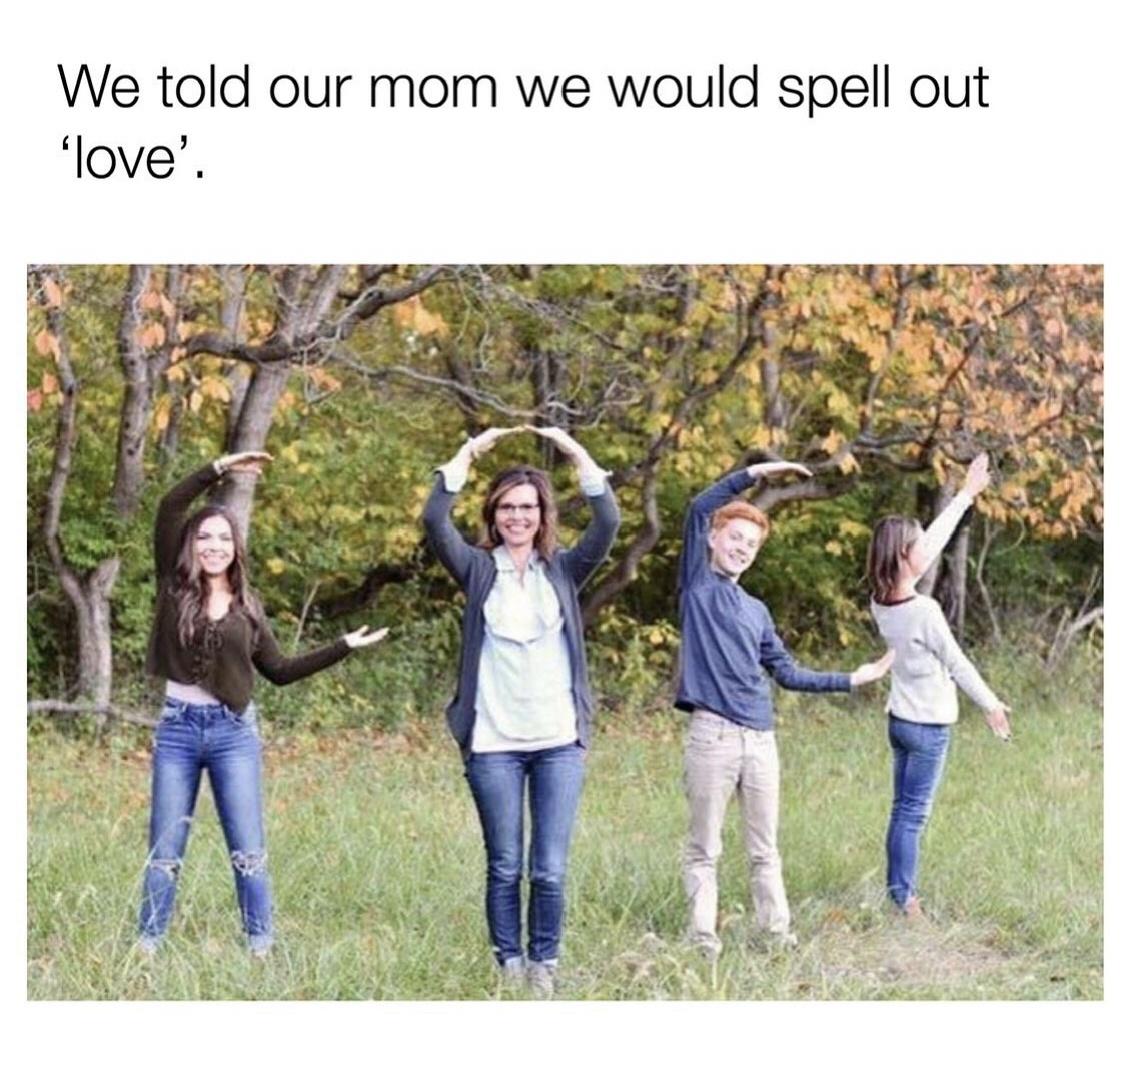 mom thought we spelled love - We told our mom we would spell out 'love'.